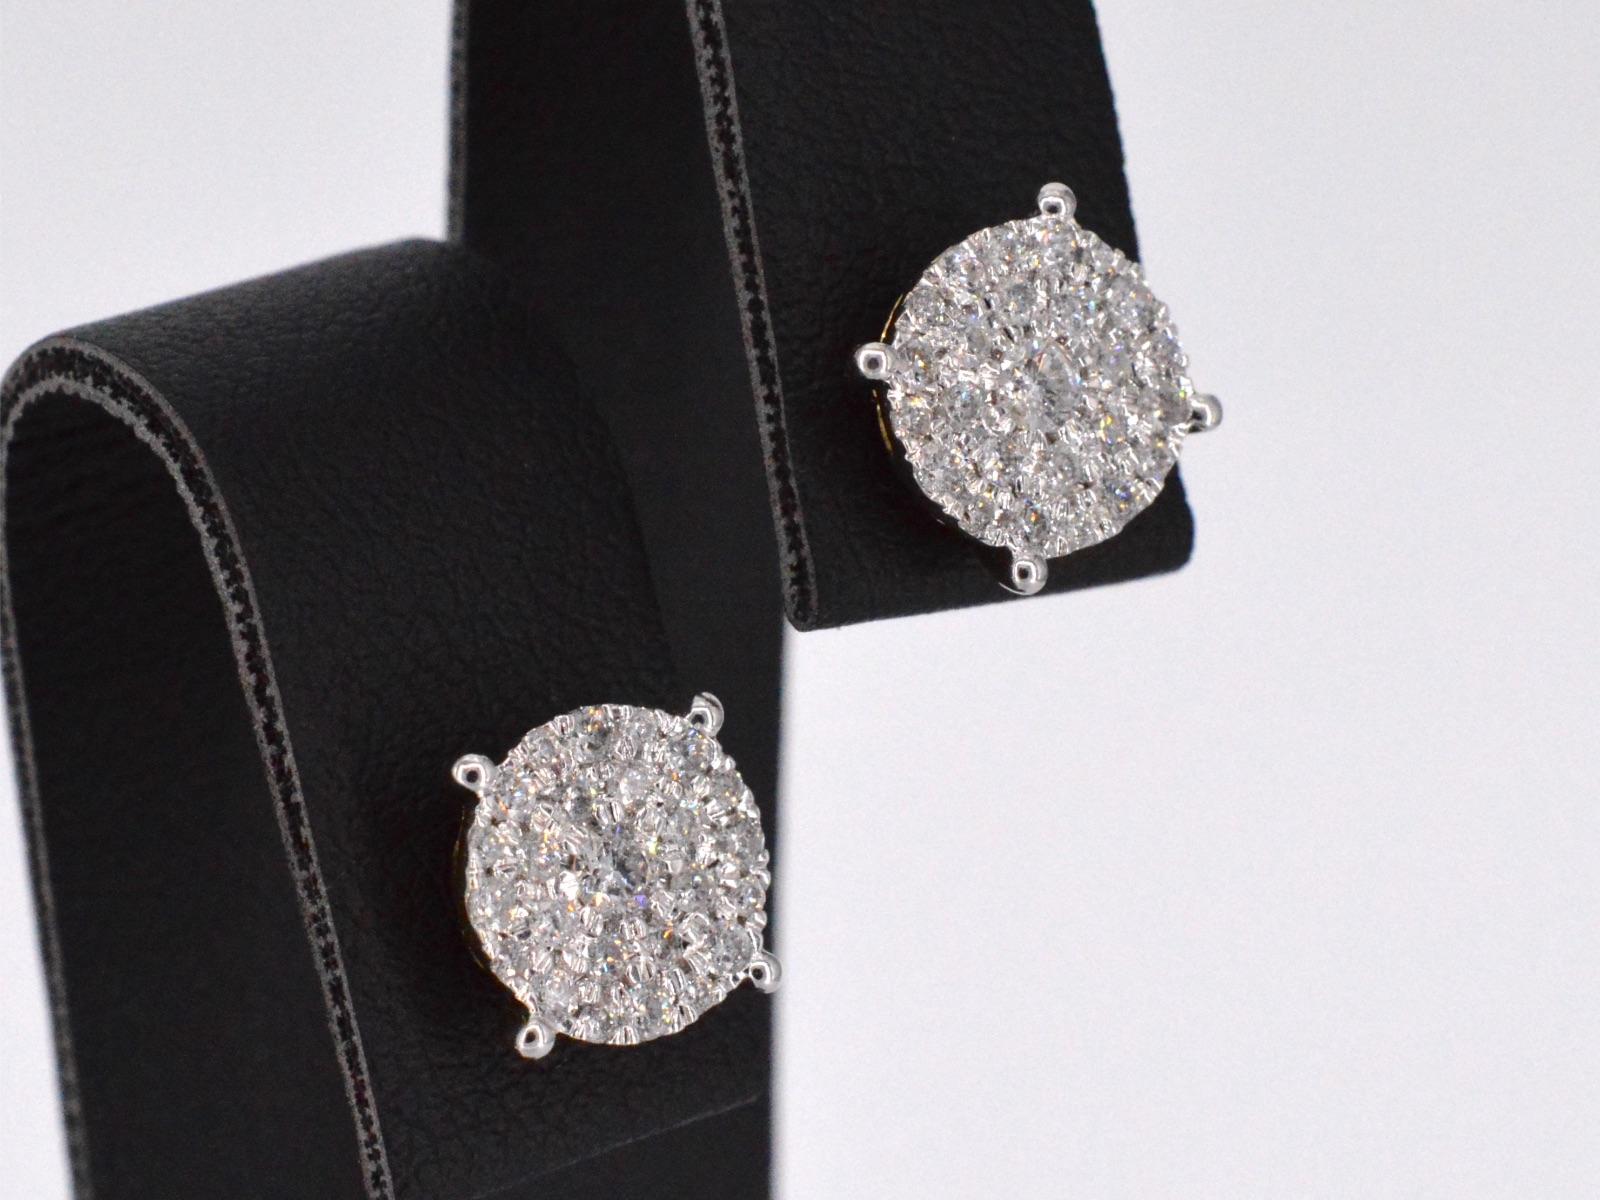 Women's Gold Earrings with a Brilliant Cut Diamond For Sale